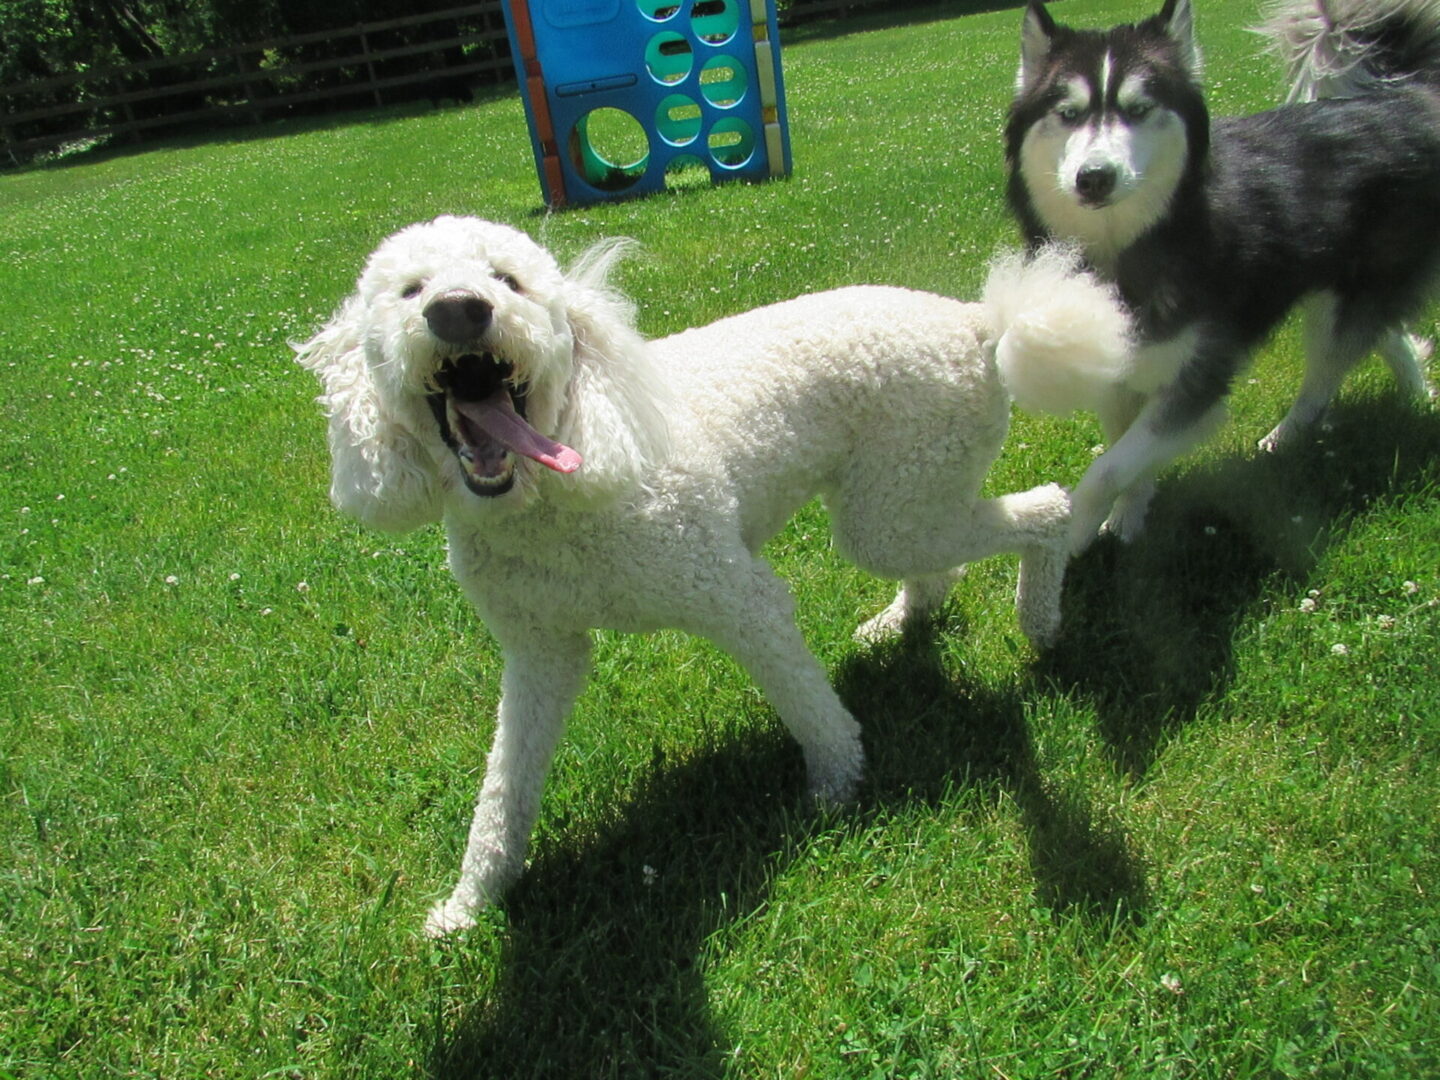 A white dog being chased by a husky